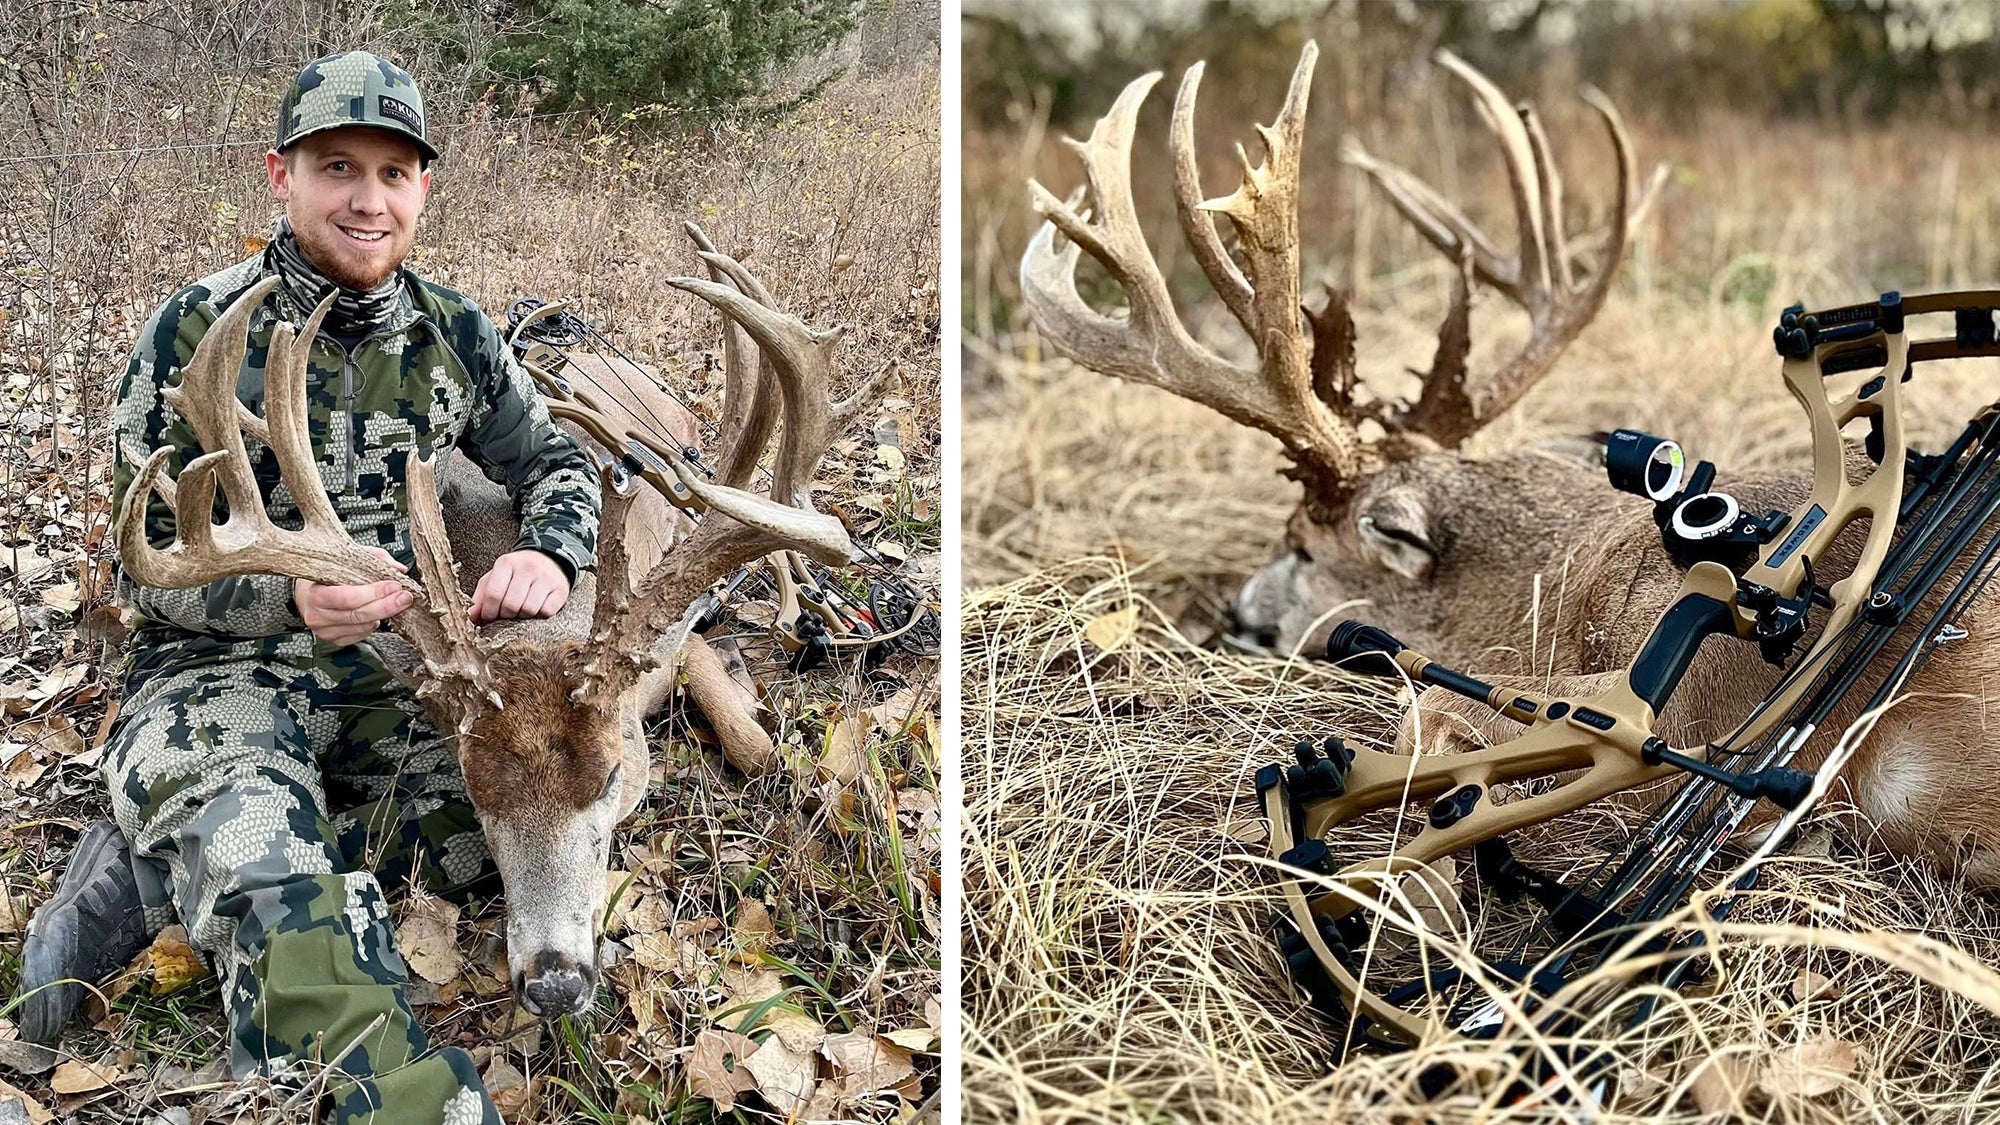 Hunter sitting on ground showing of huge whitetail buck, left; same buck on the ground with bow, right